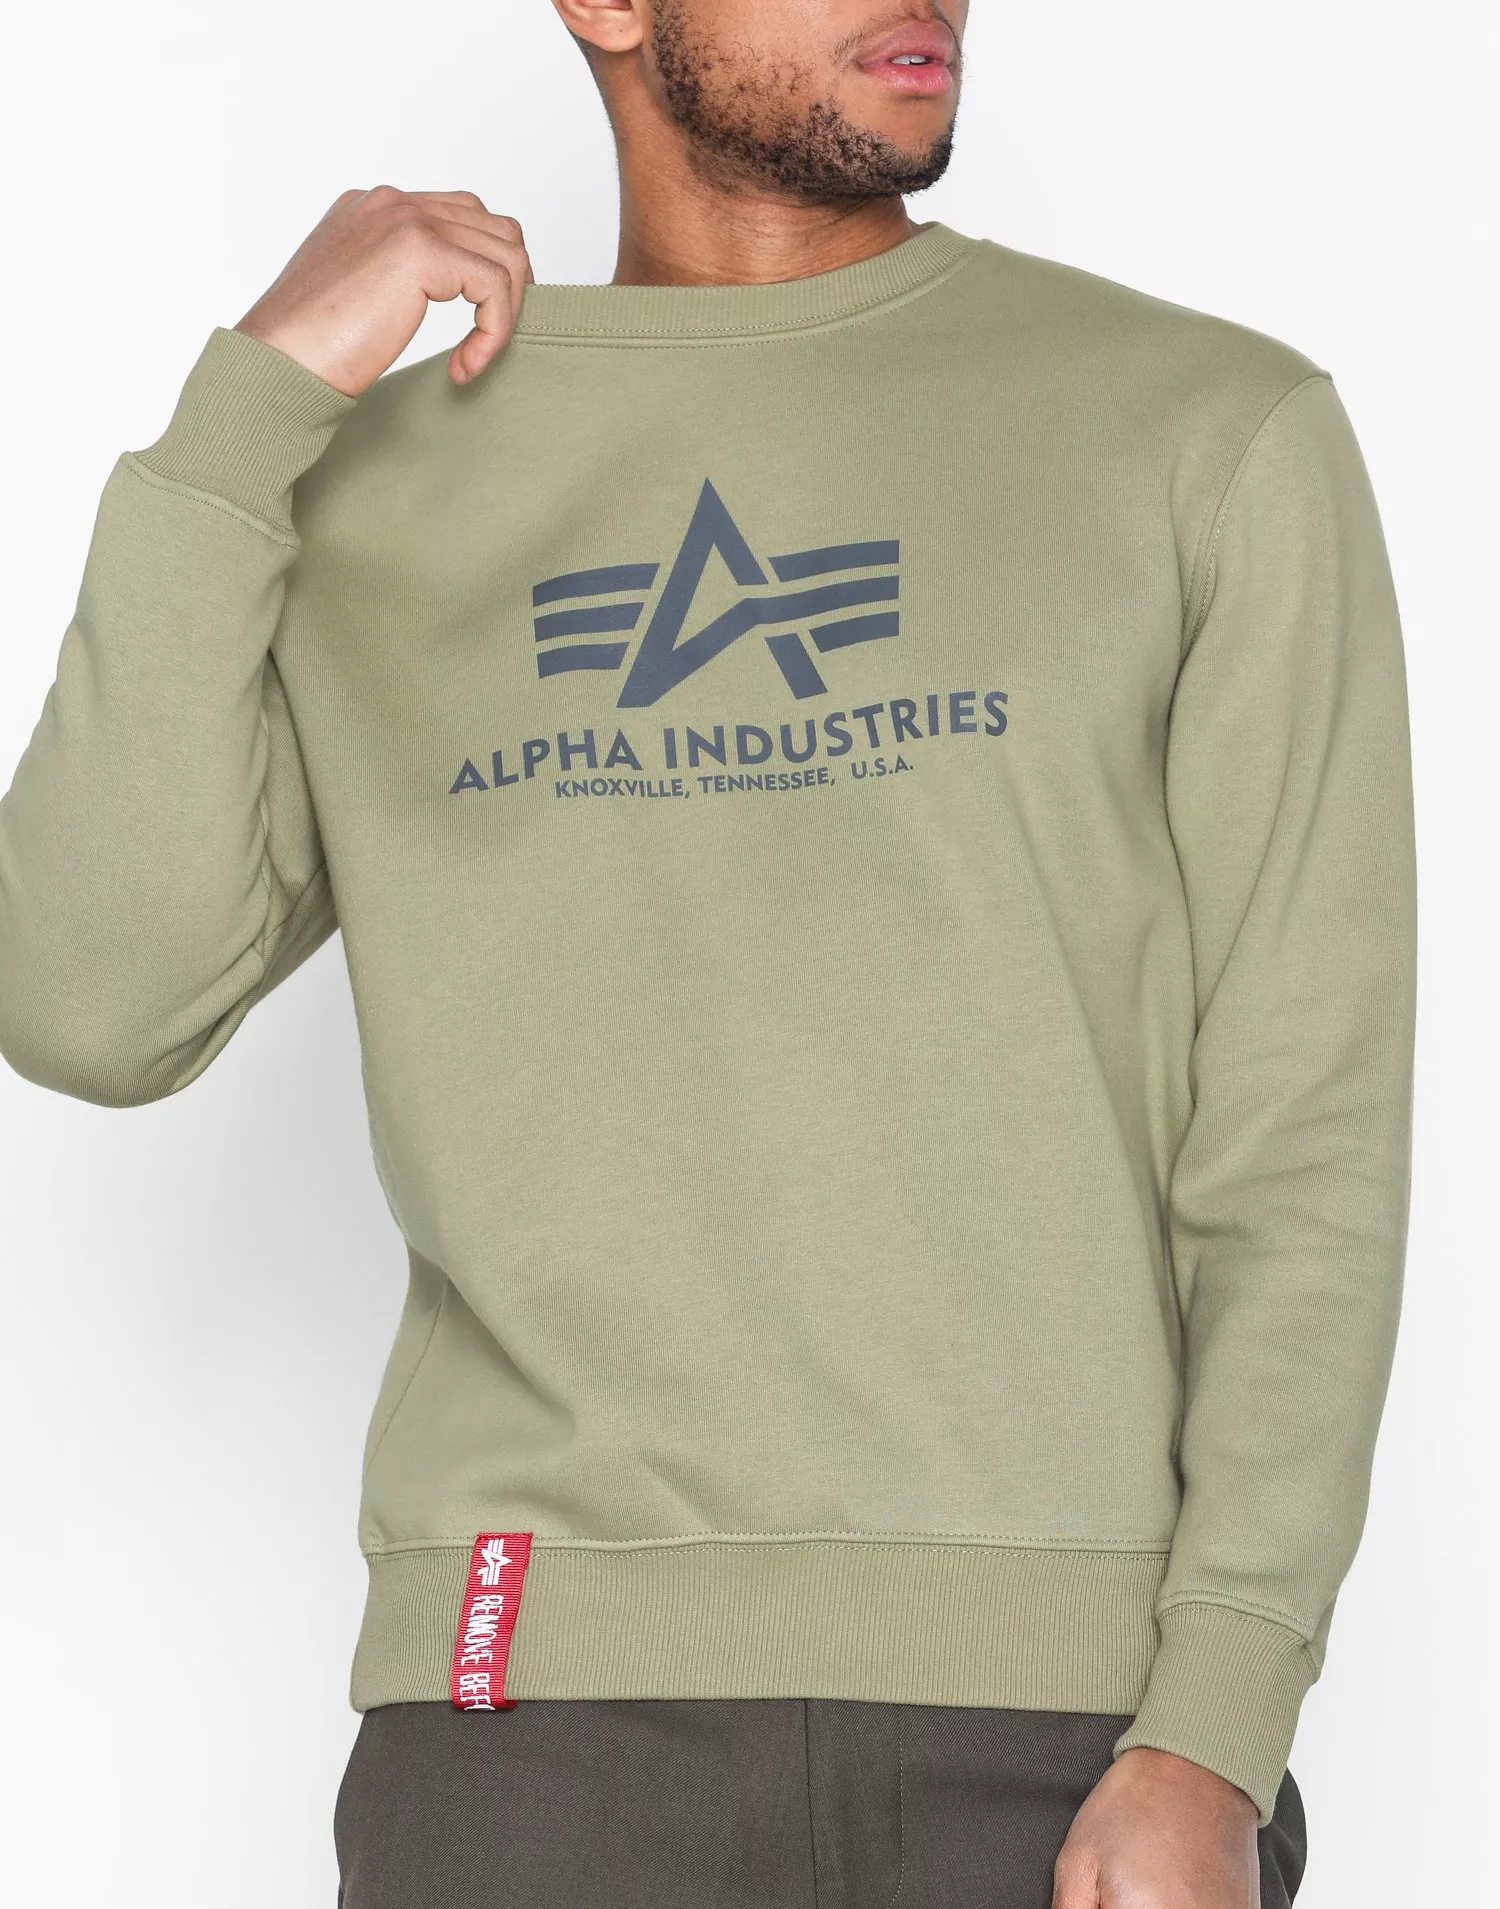 Basic Buy NLY Sweater Man Industries Alpha - Olive |